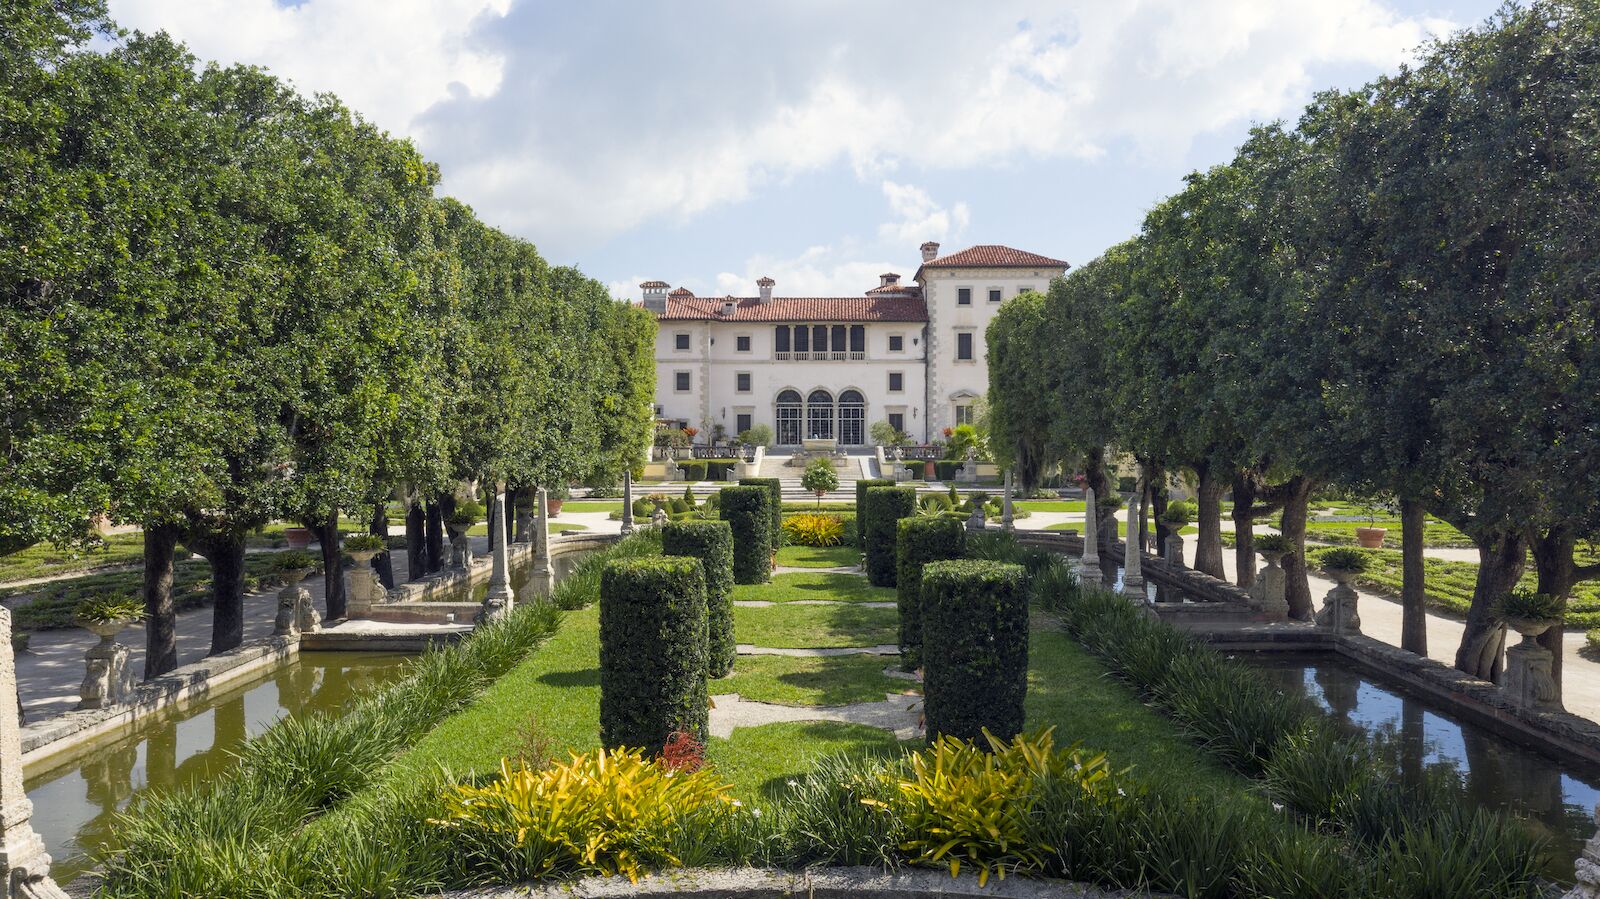 View of the Vizcaya Museum and Gardens from the lush greenery